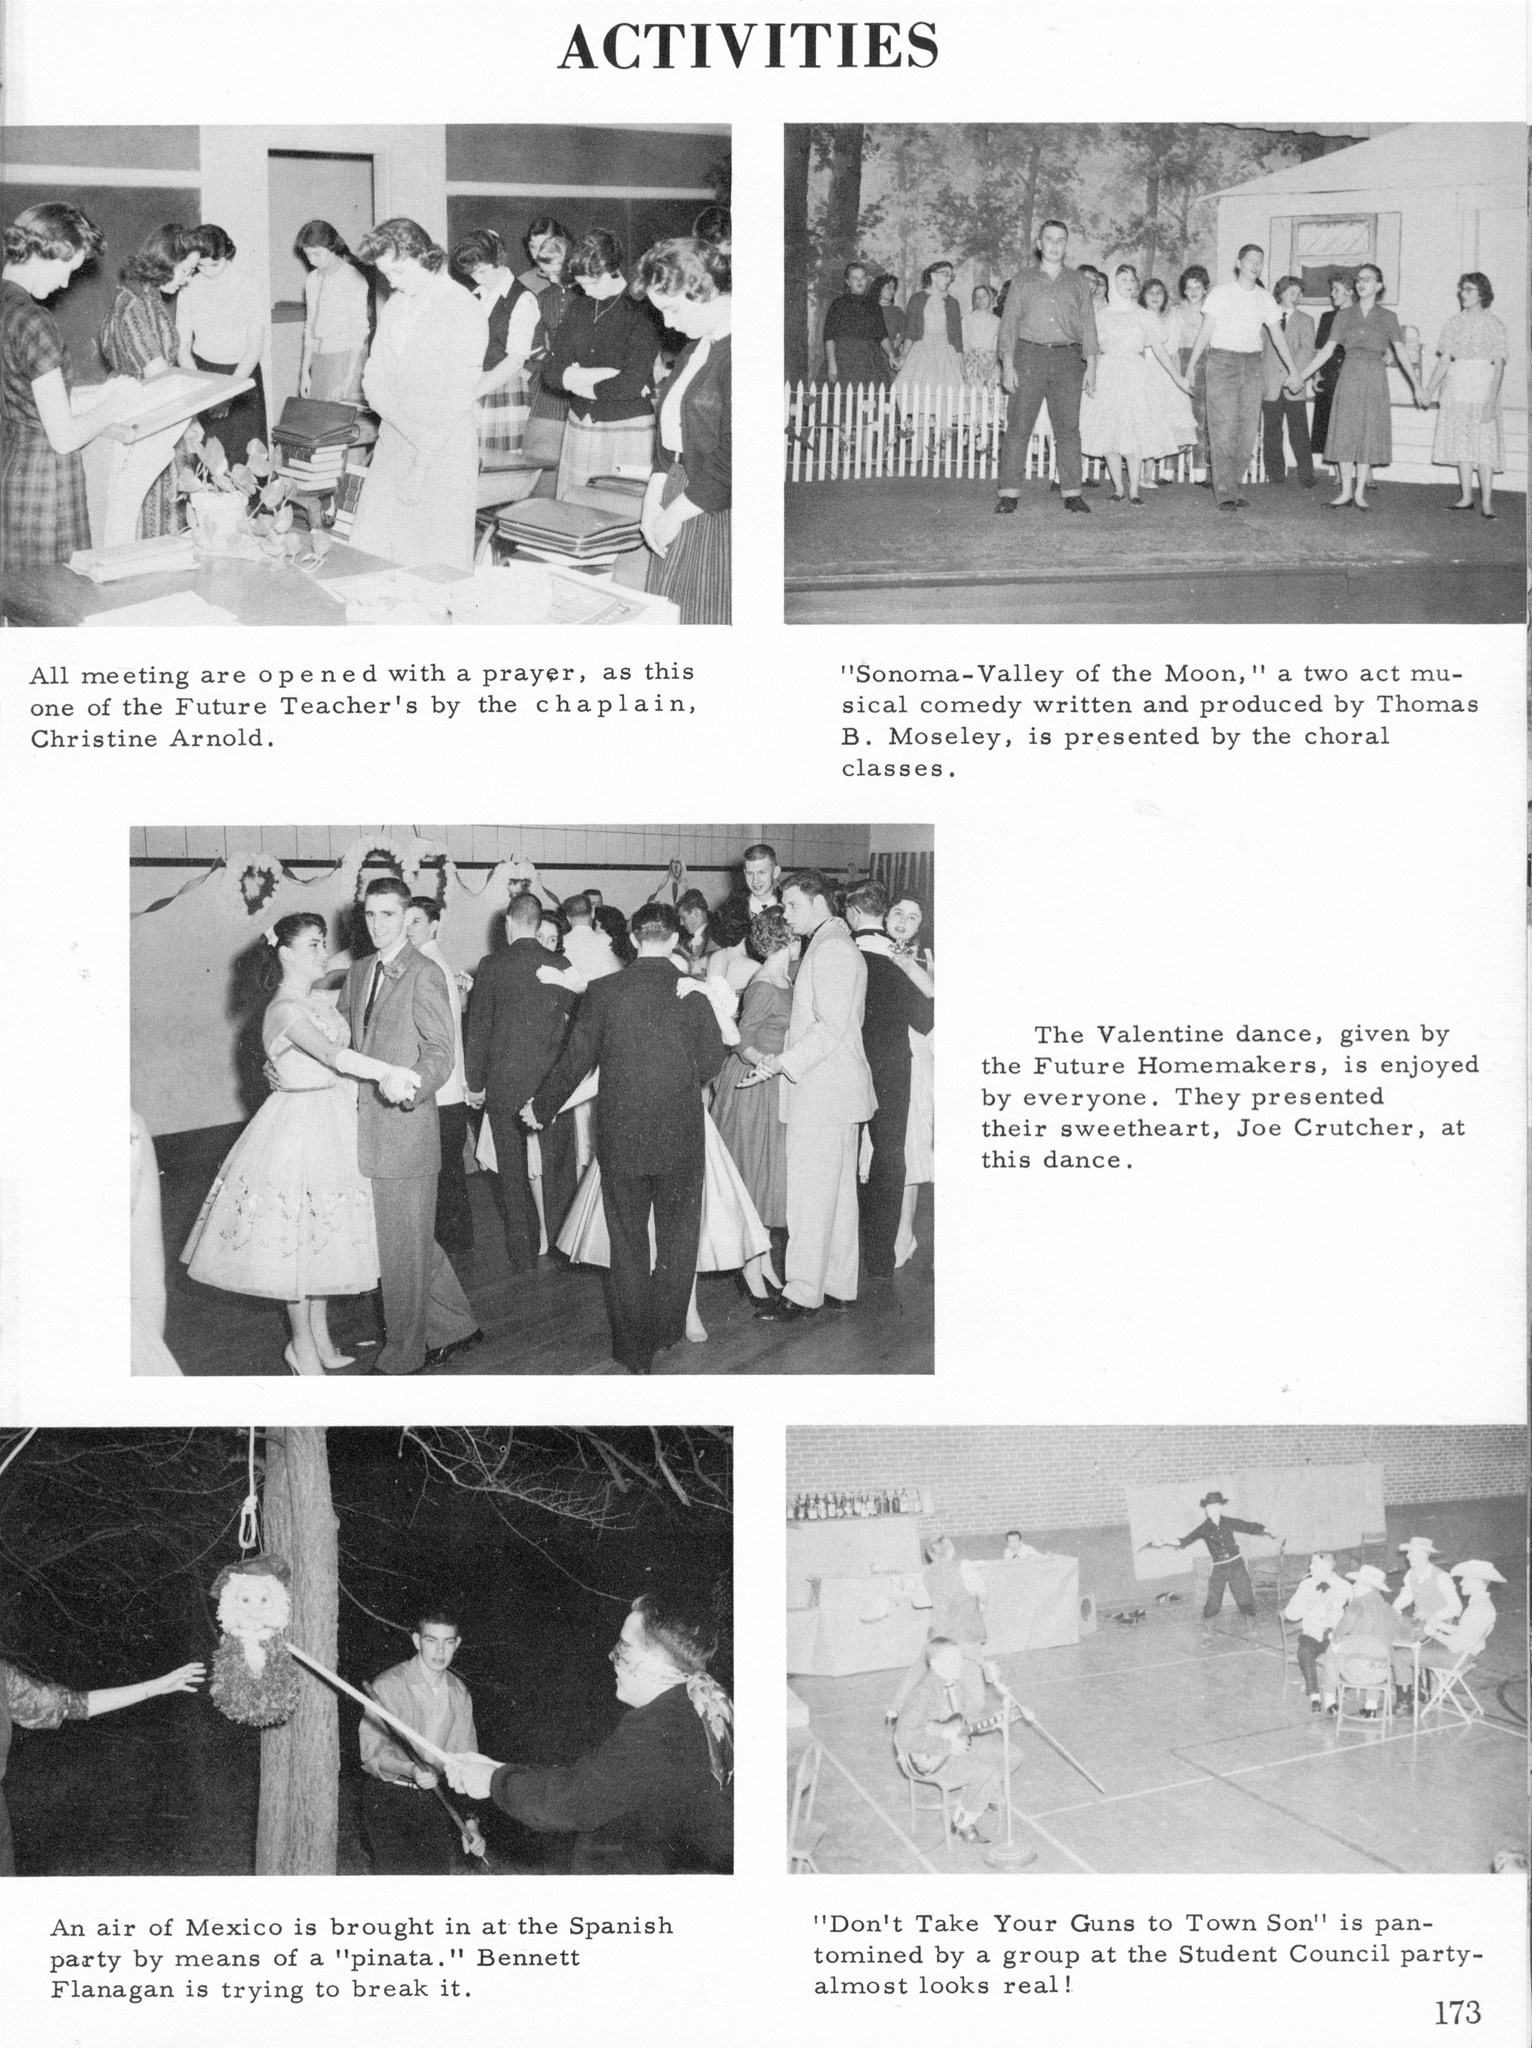 ../../../Images/Large/1959/Arclight-1959-pg0173.jpg